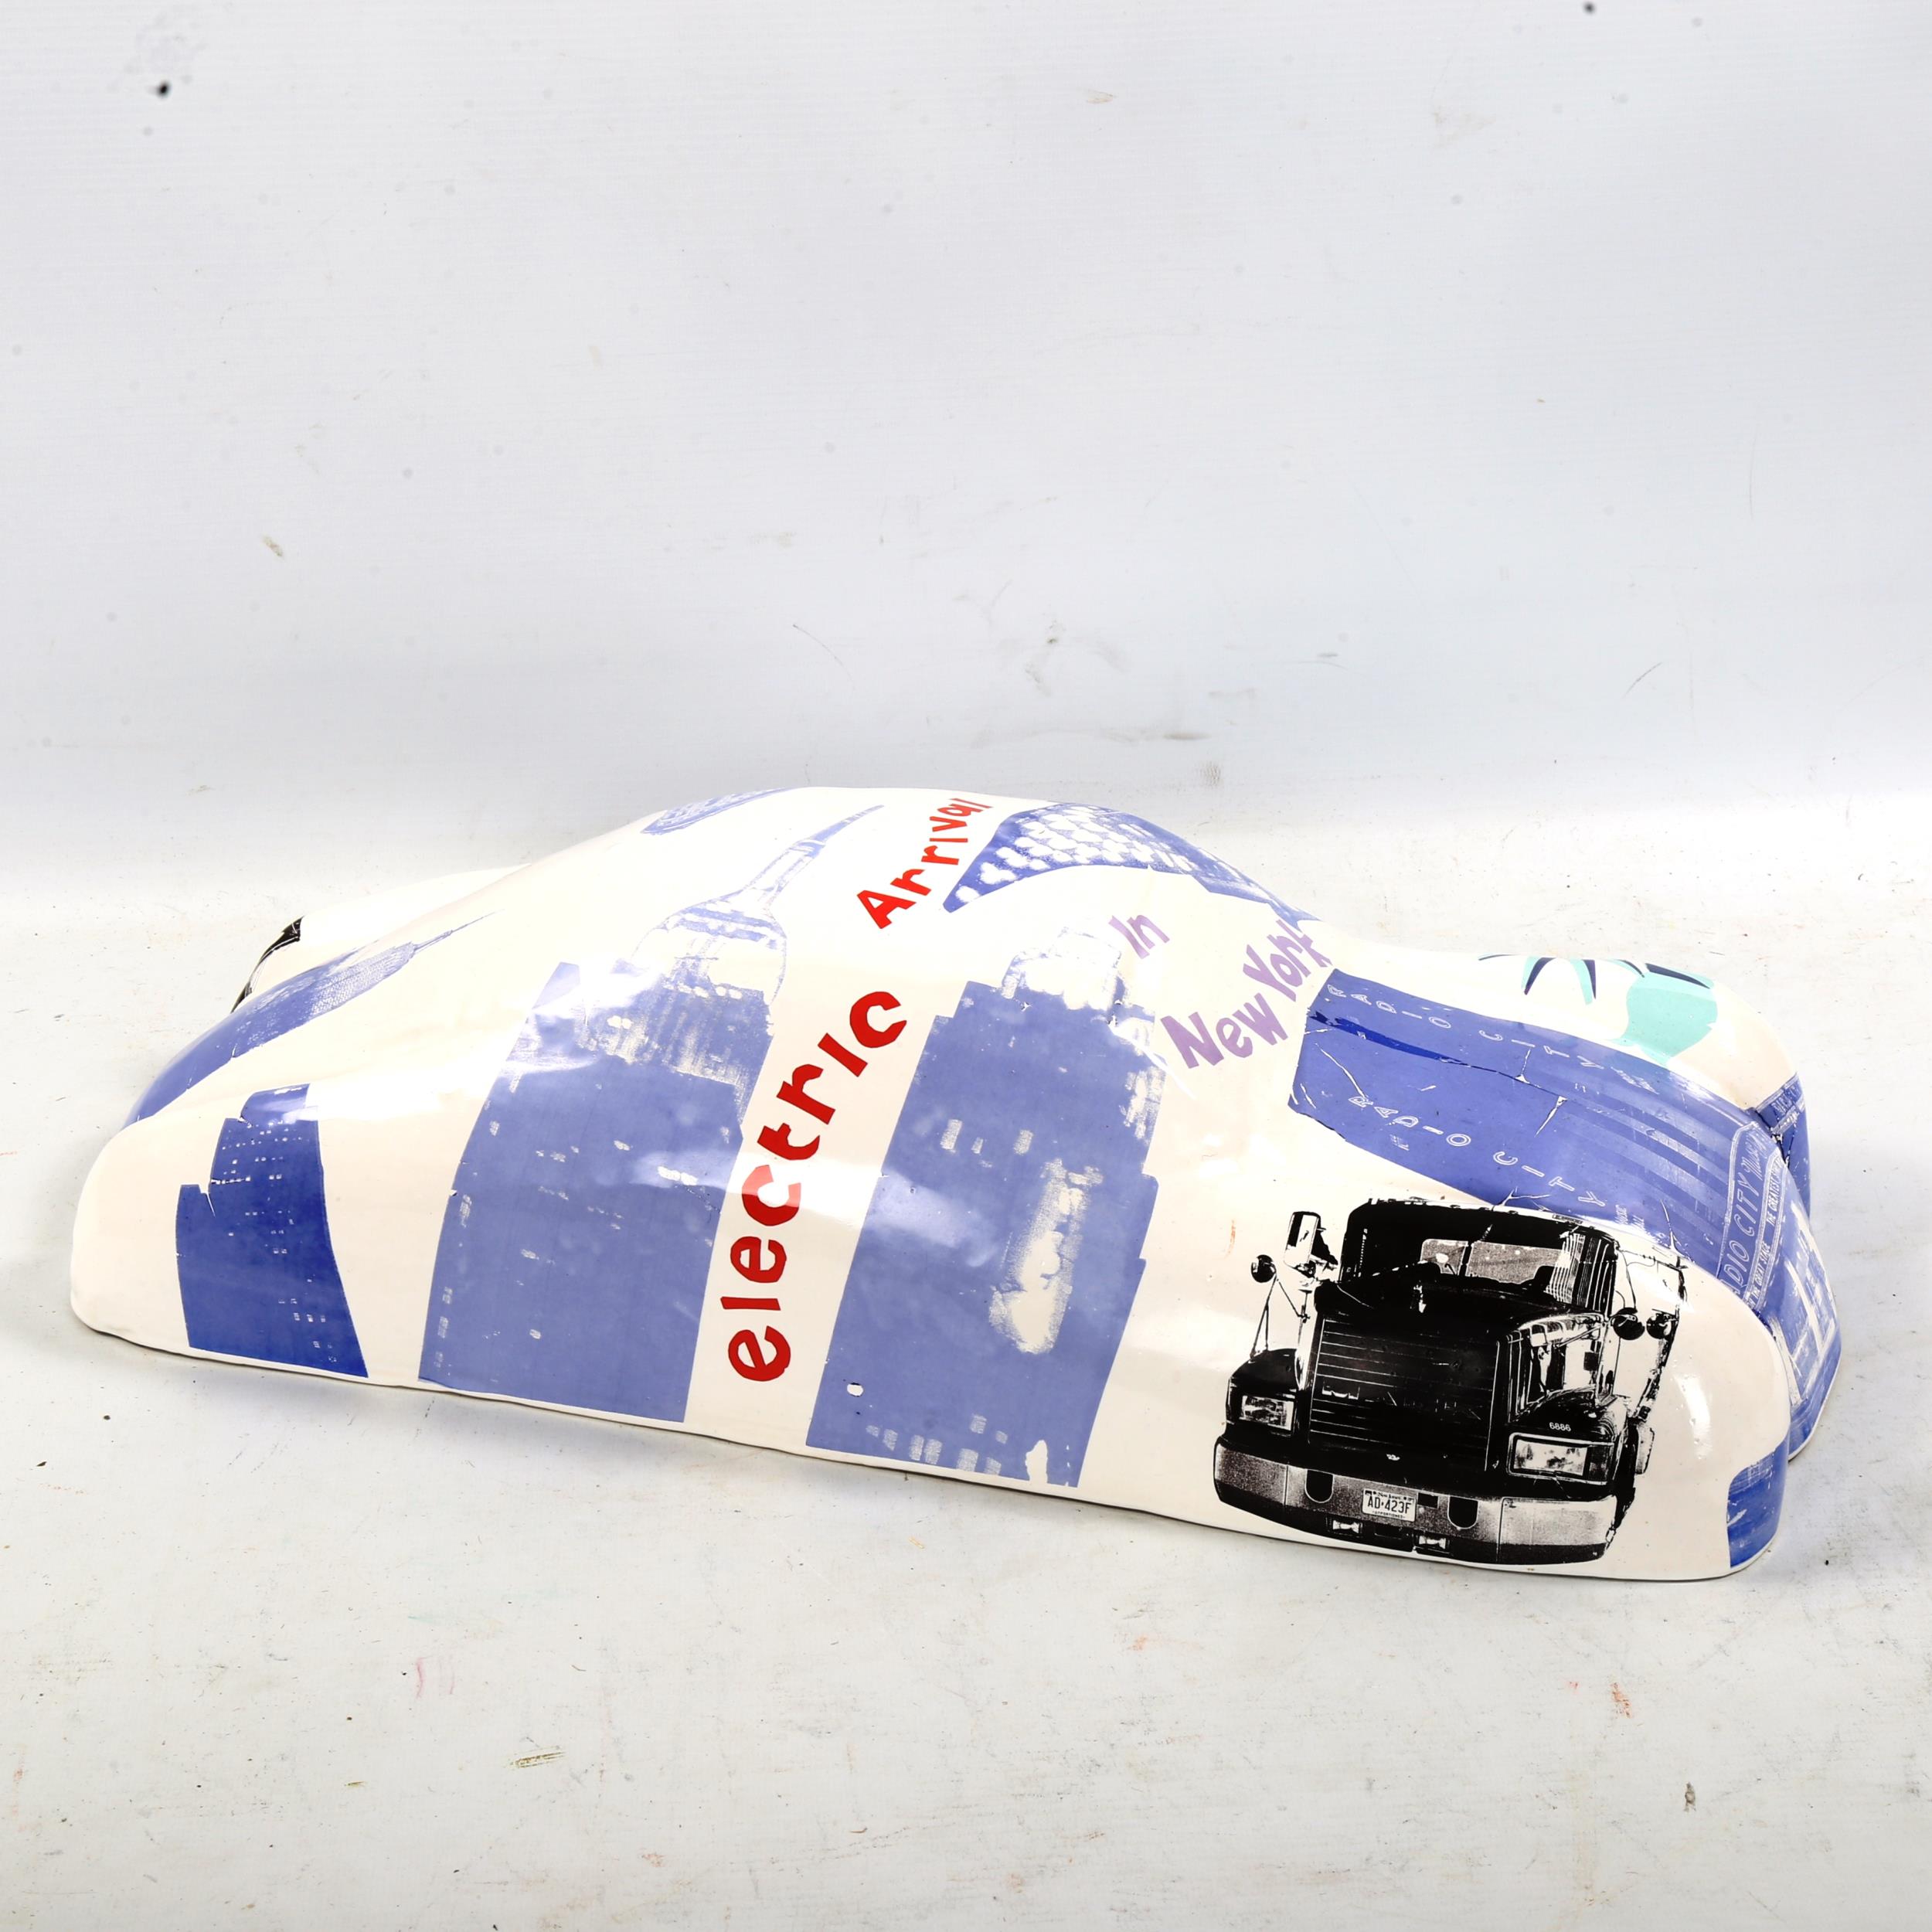 Phil Cosham, ceramic with applied print, New York taxi, exhibited at the RA, length 50cm Good - Image 4 of 4